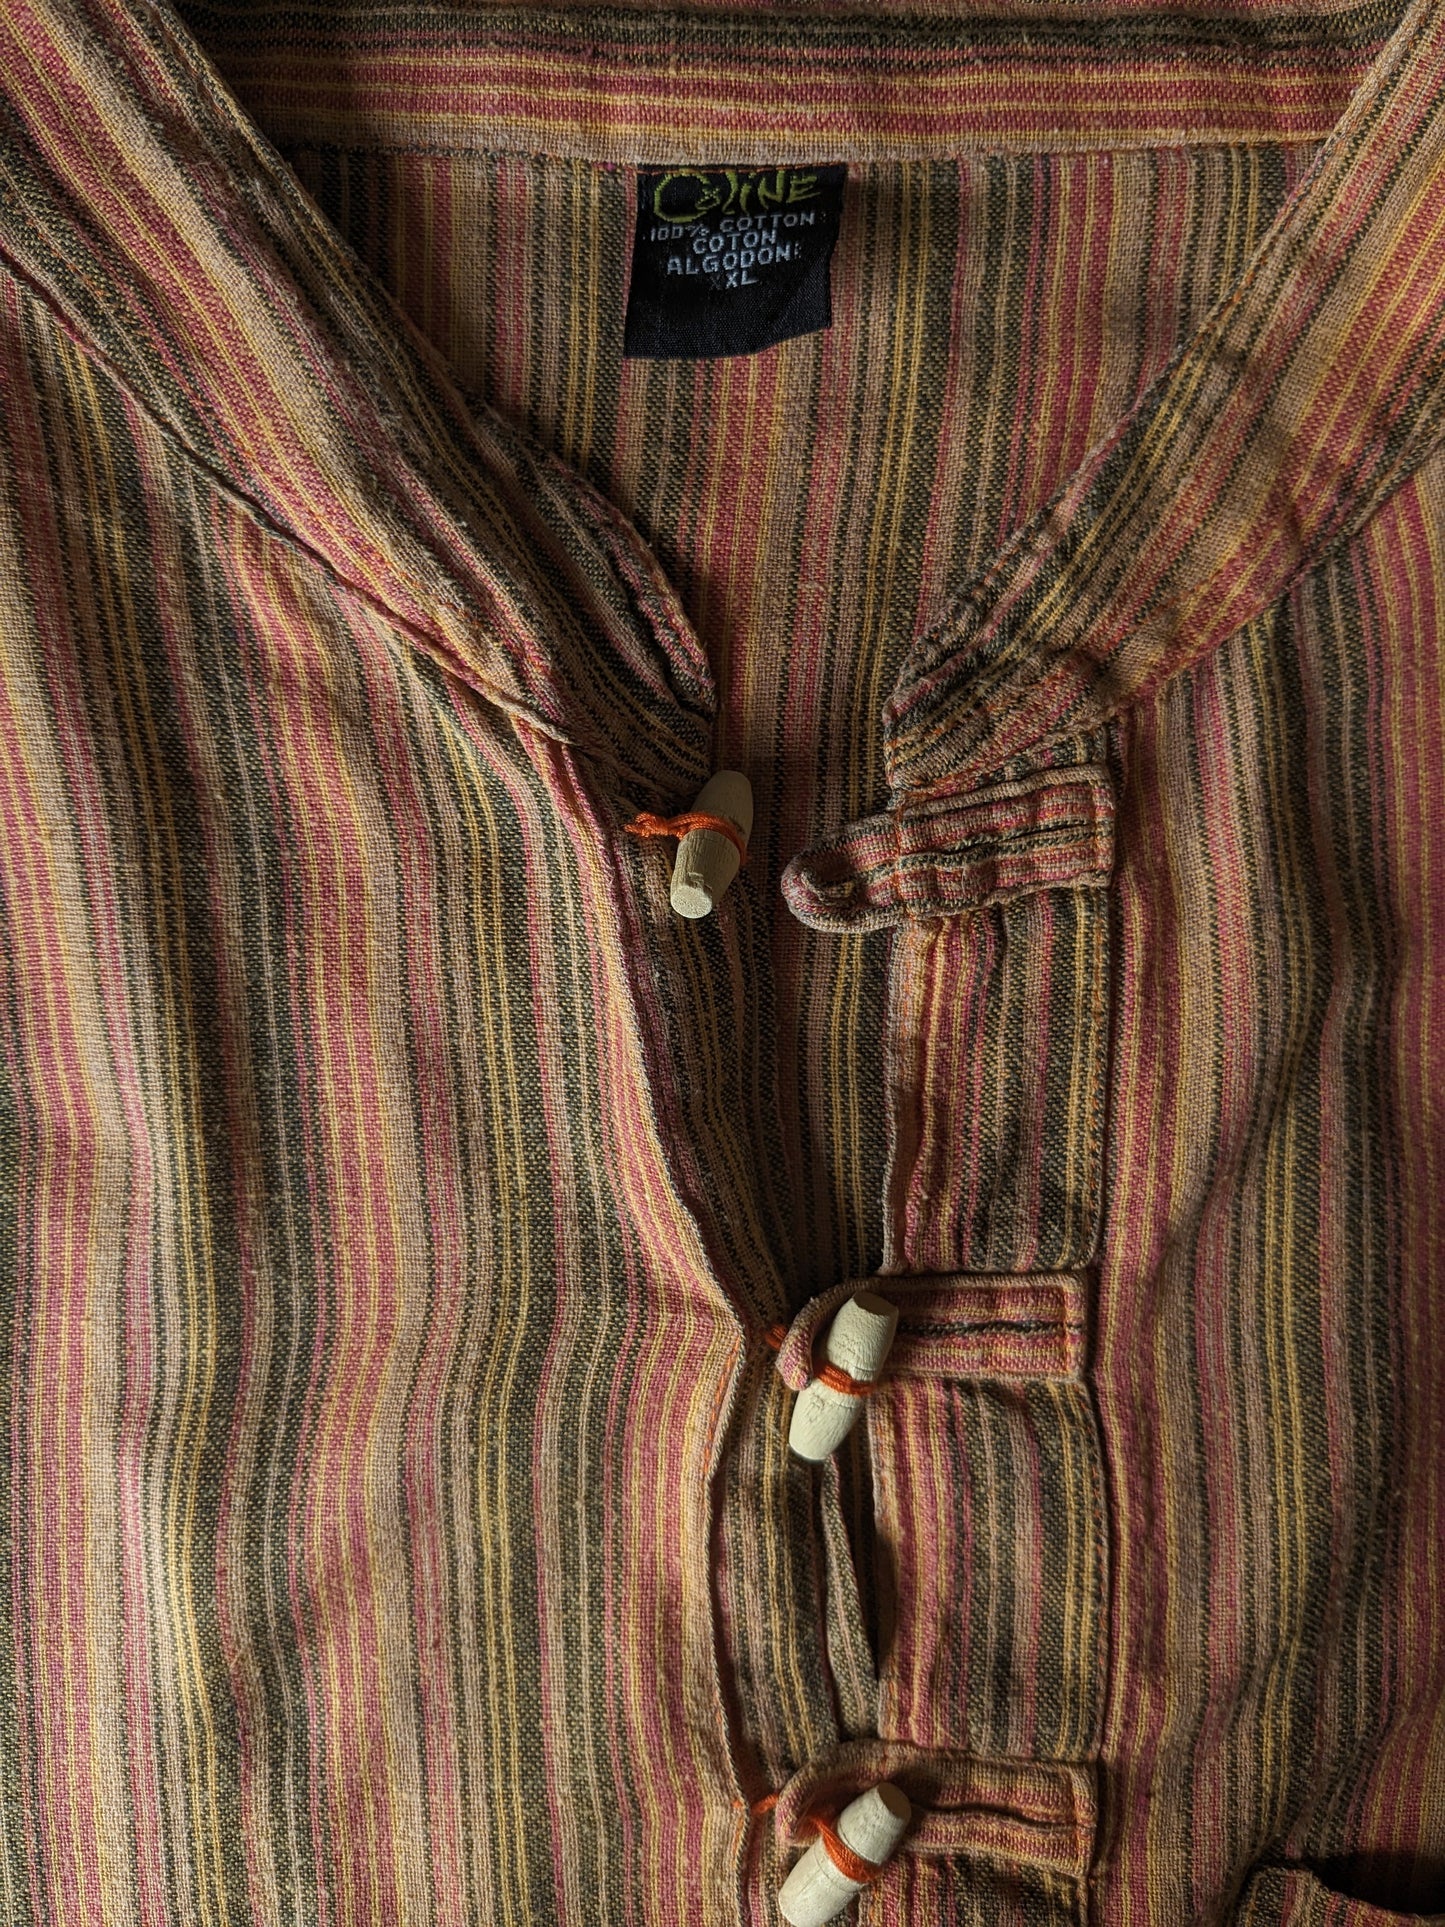 Vintage Coline shirt shirt with Mao / Farmer / Standing Collar. Orange red yellow black striped. Size XL.